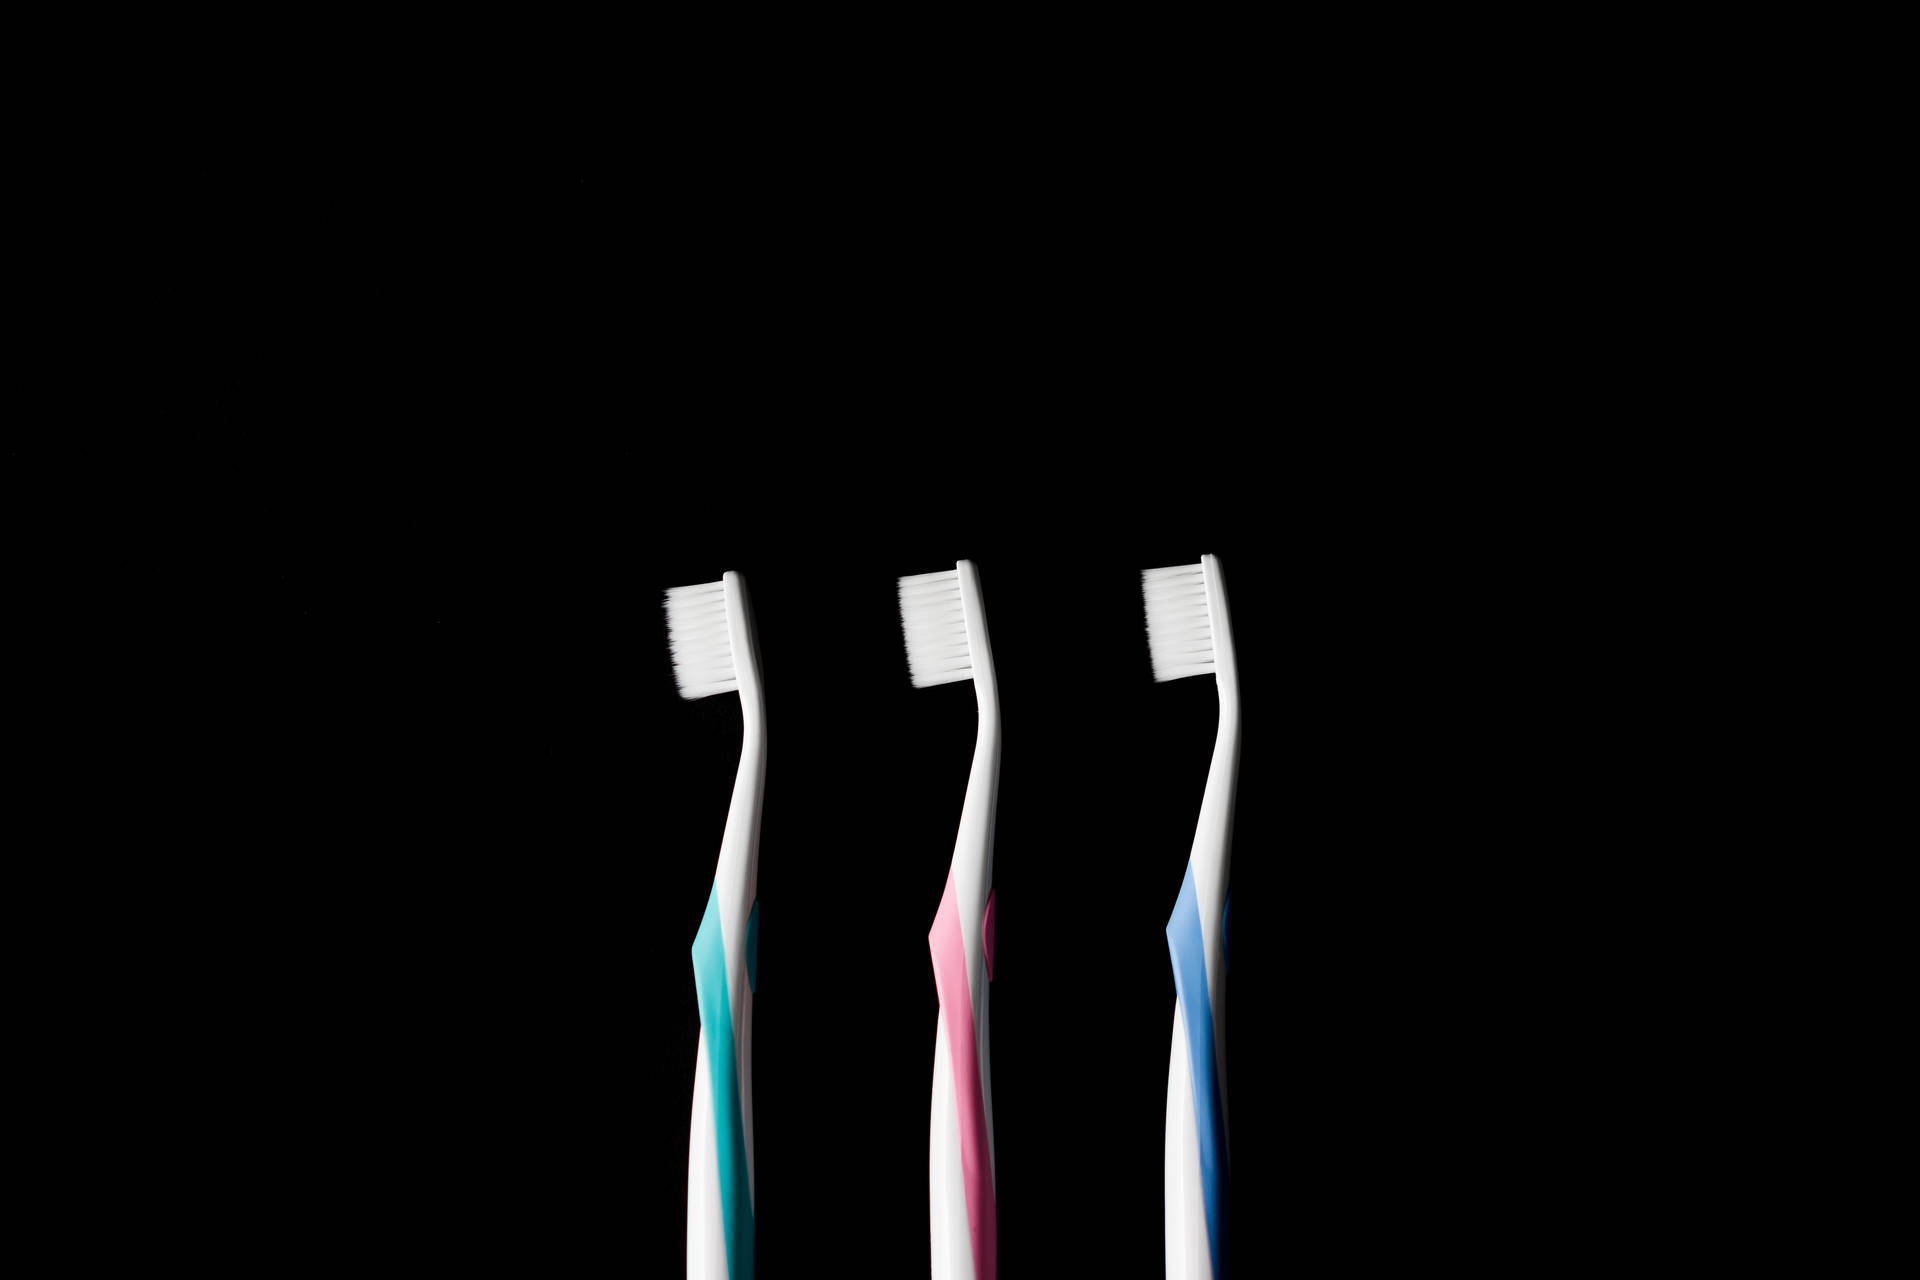 Three Toothbrushes Dentistry Background